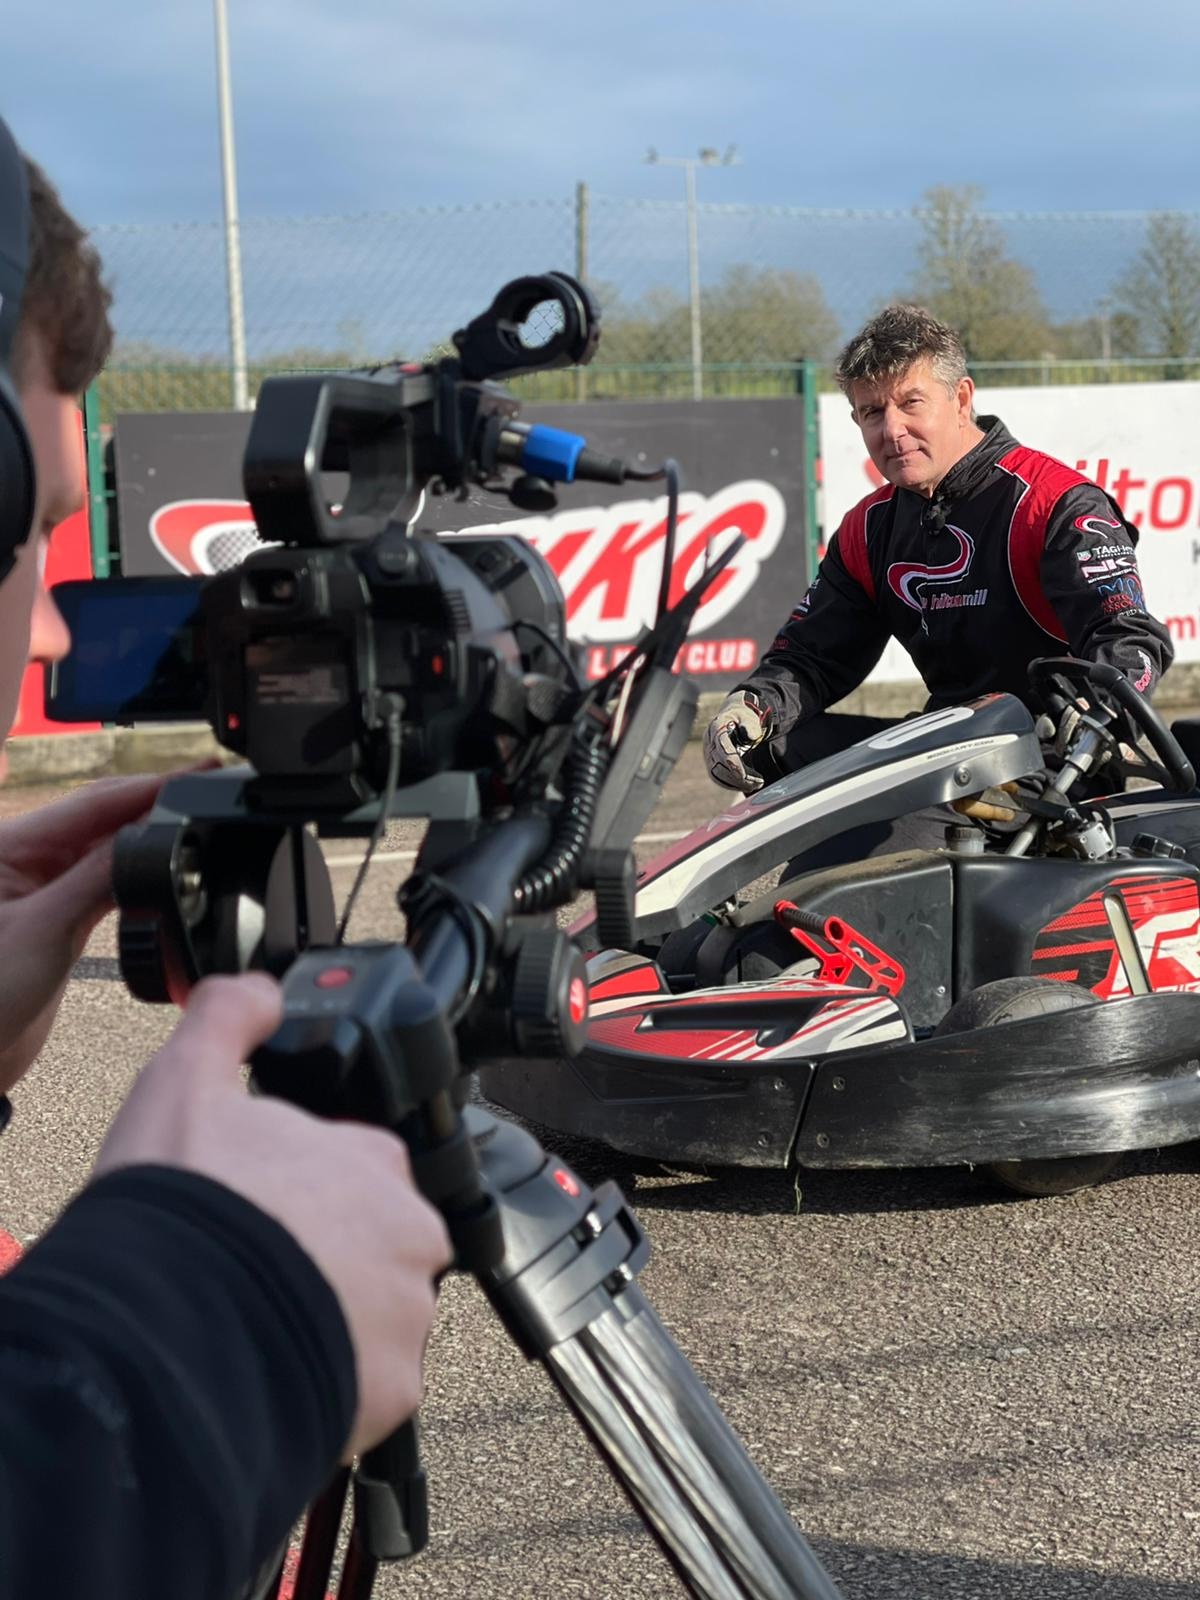 Filming for Whilton Mill